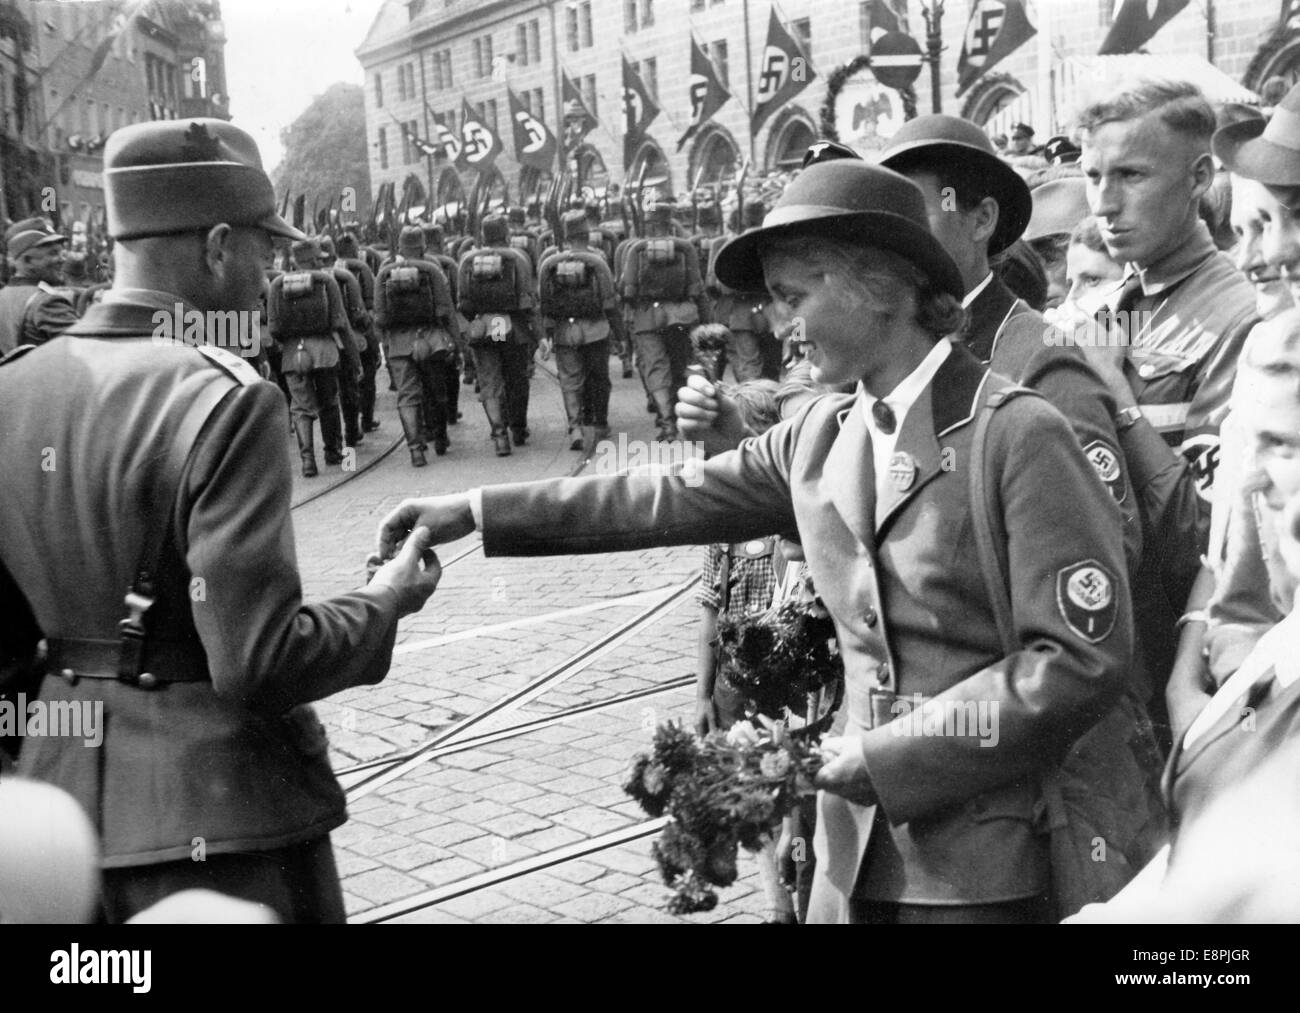 Nuremberg Rally 1937 in Nuremberg, Germany - A female member of the Reich Labour Service (RAD) offers refreshments to male members of the RAD as they march through the streets of the city with spades and knapsacks. (Flaws in quality due to the historic picture copy) Fotoarchiv für Zeitgeschichtee - NO WIRE SERVICE - Stock Photo